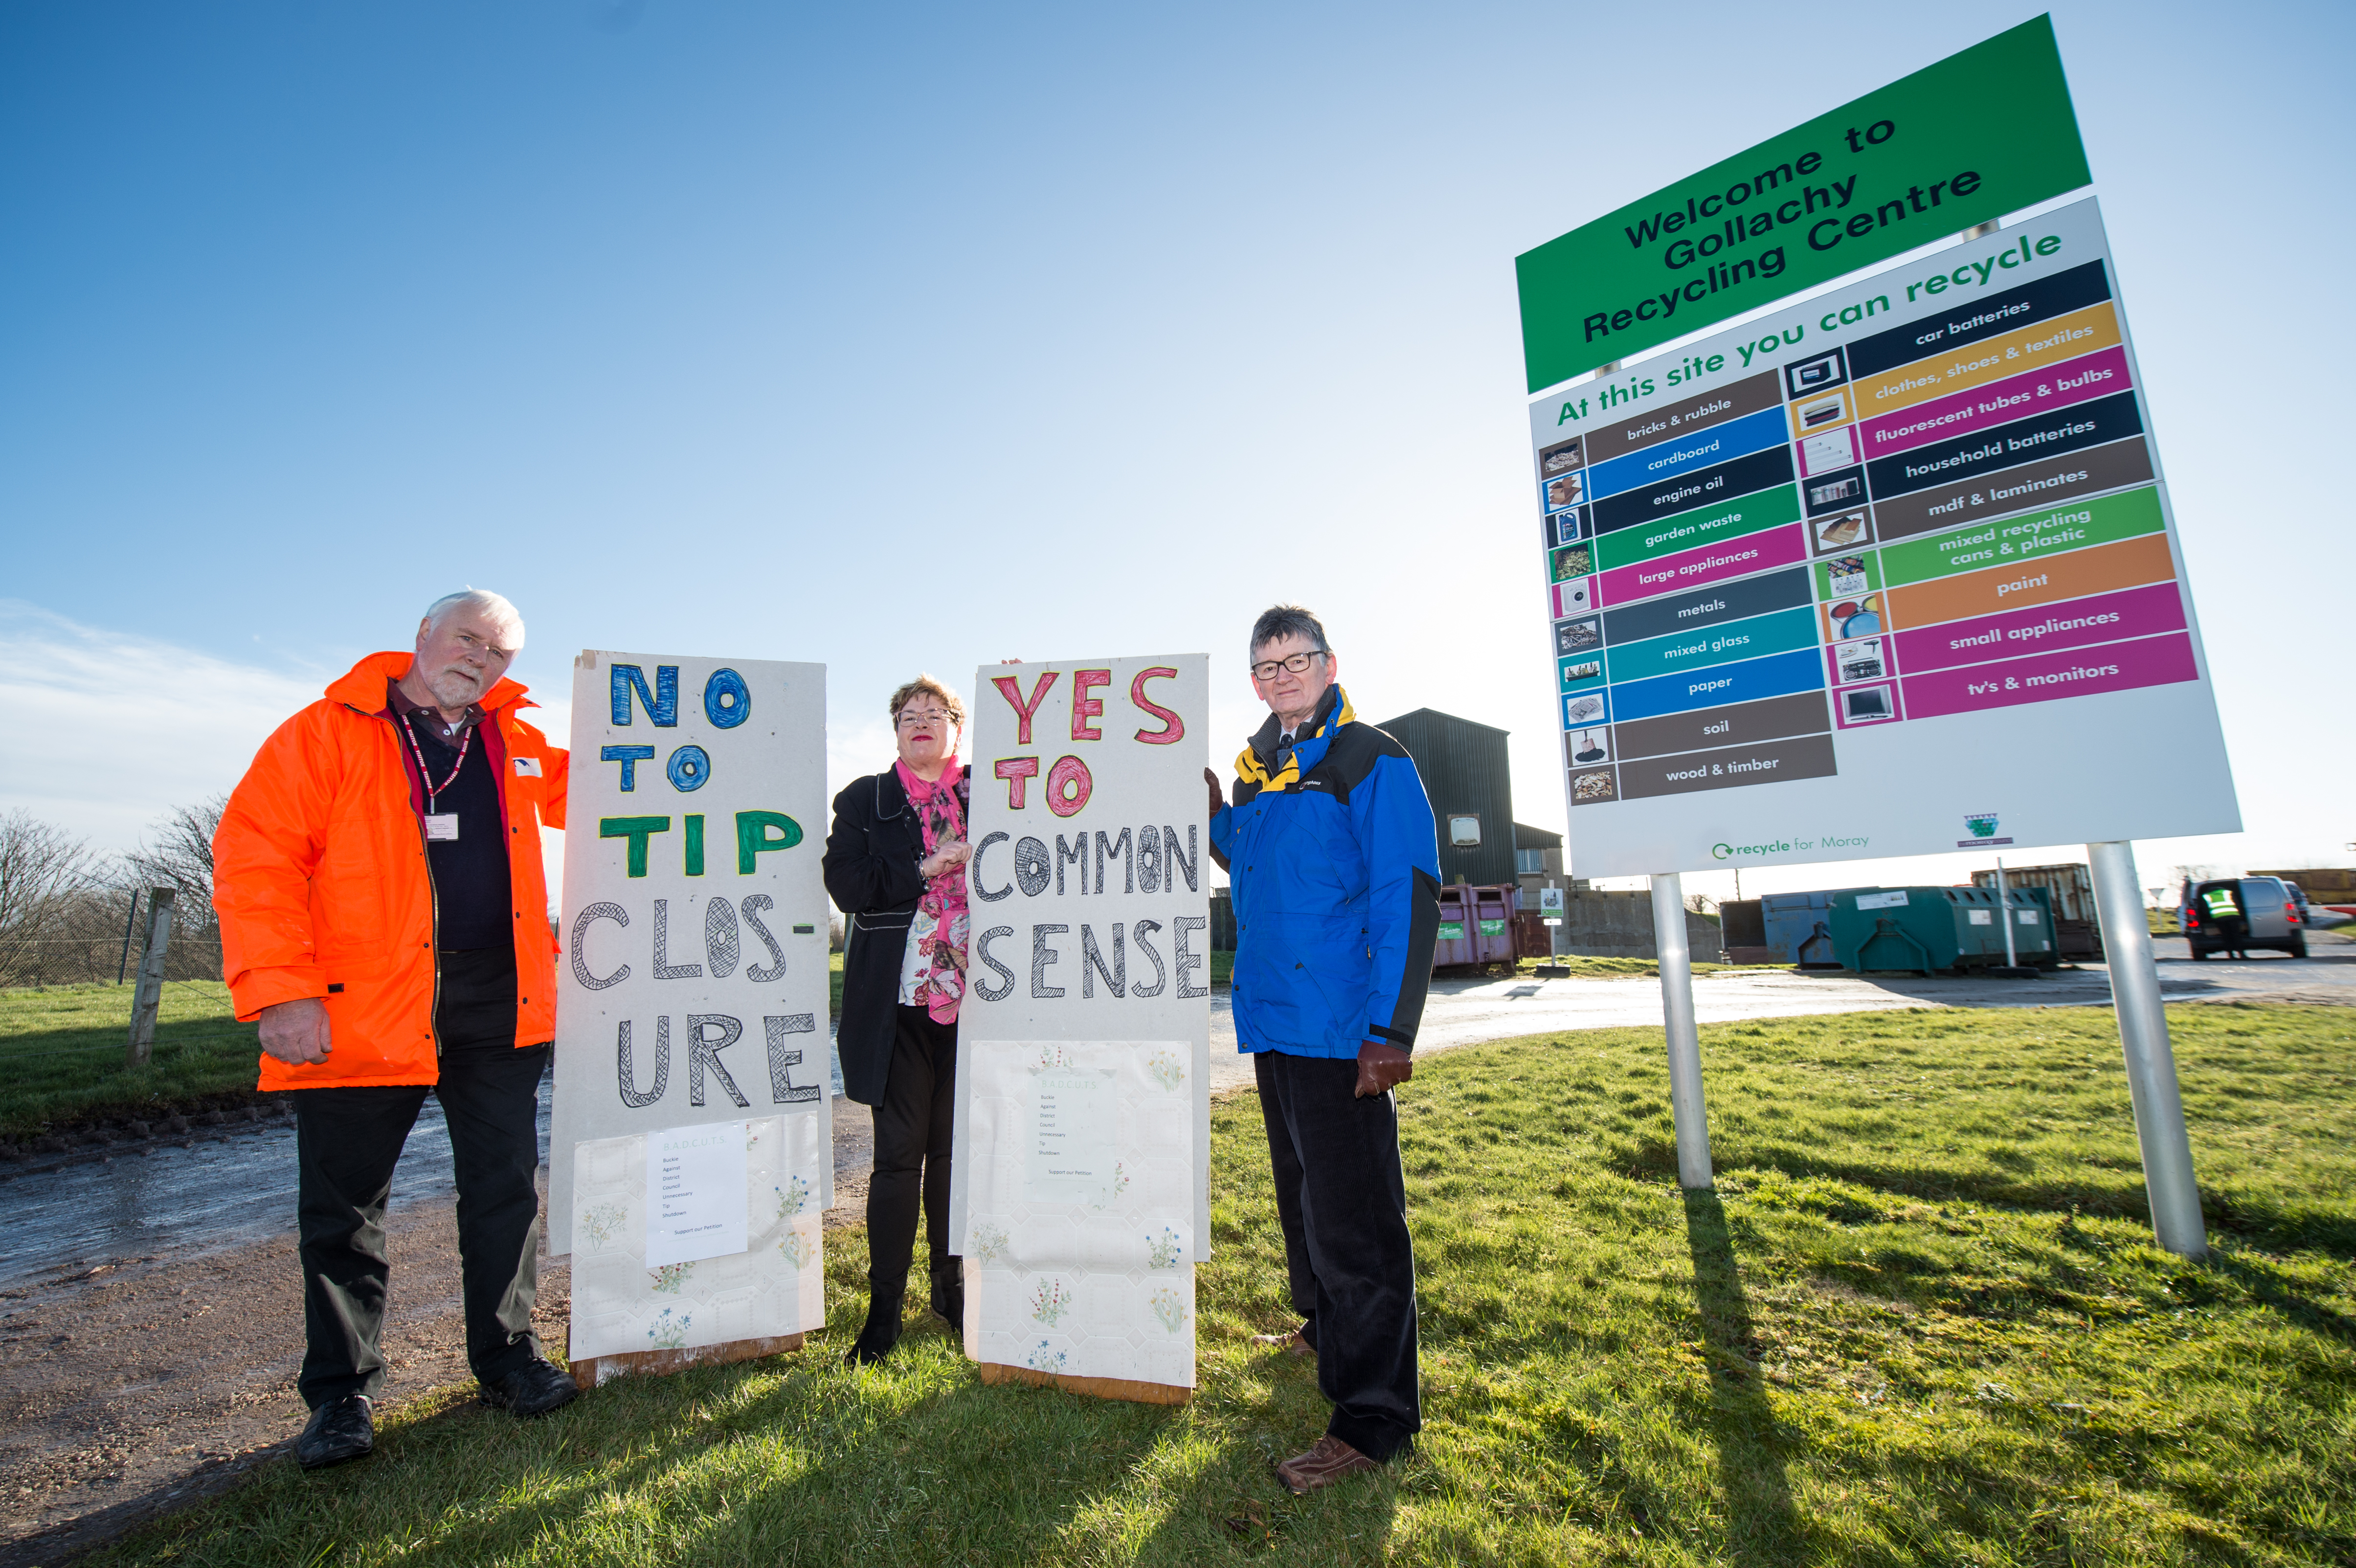 From left: Angus McNair (Petition Lead) at Lennox Community Council, Christine Allan (Buckie & District community council) and Colin Hanover (Chairman of Lennox Community Council)